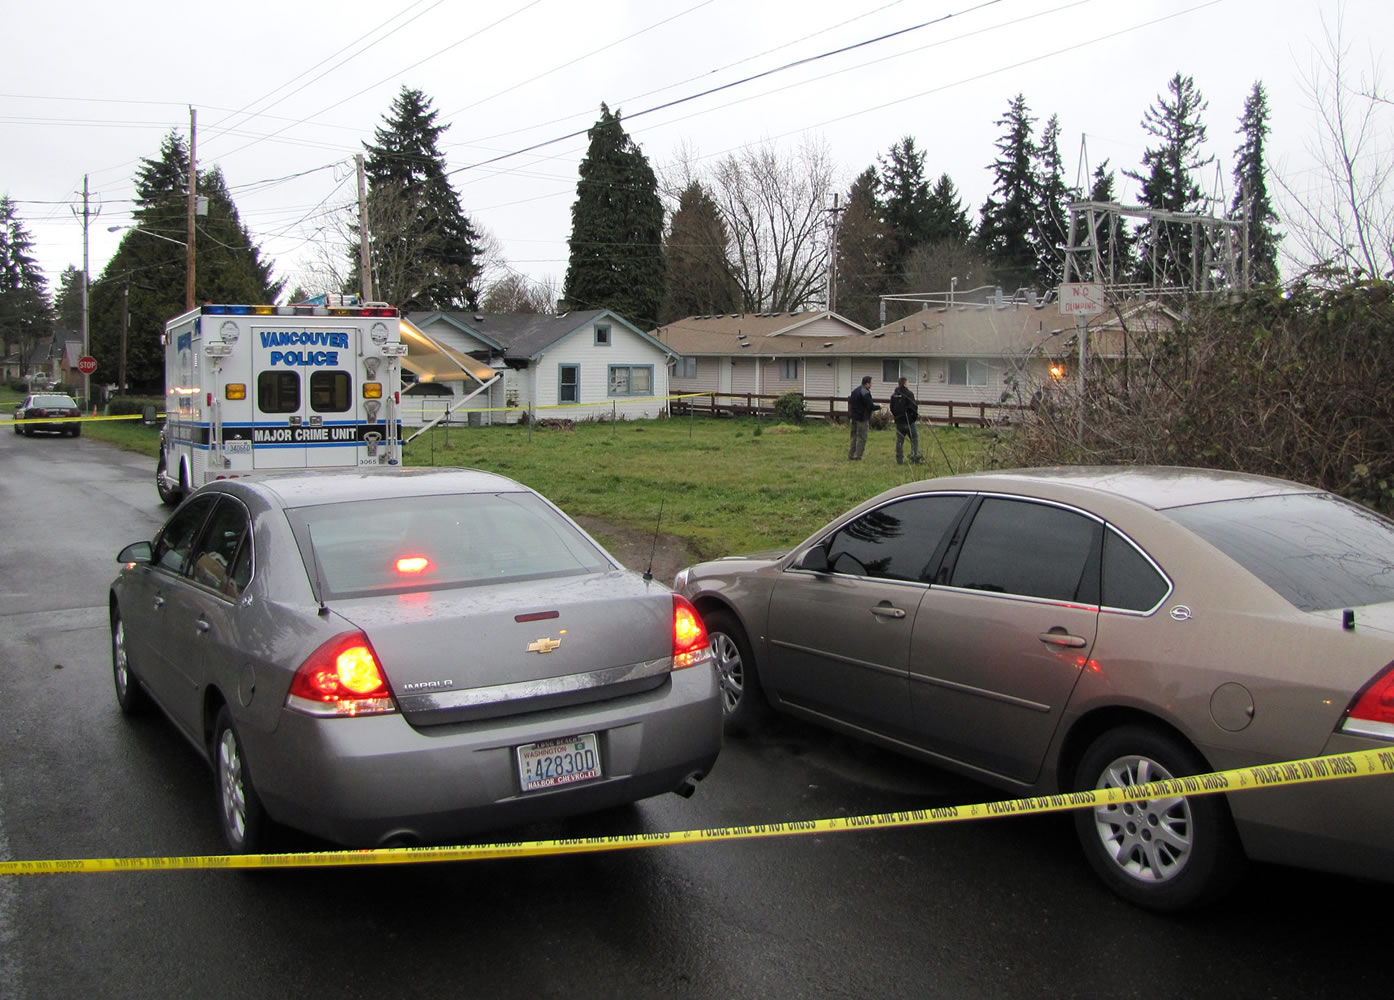 Police are investigating the circumstances surrounding the death of a man who was found near Norris Road and East 32nd Street in Vancouver early Tuesday.